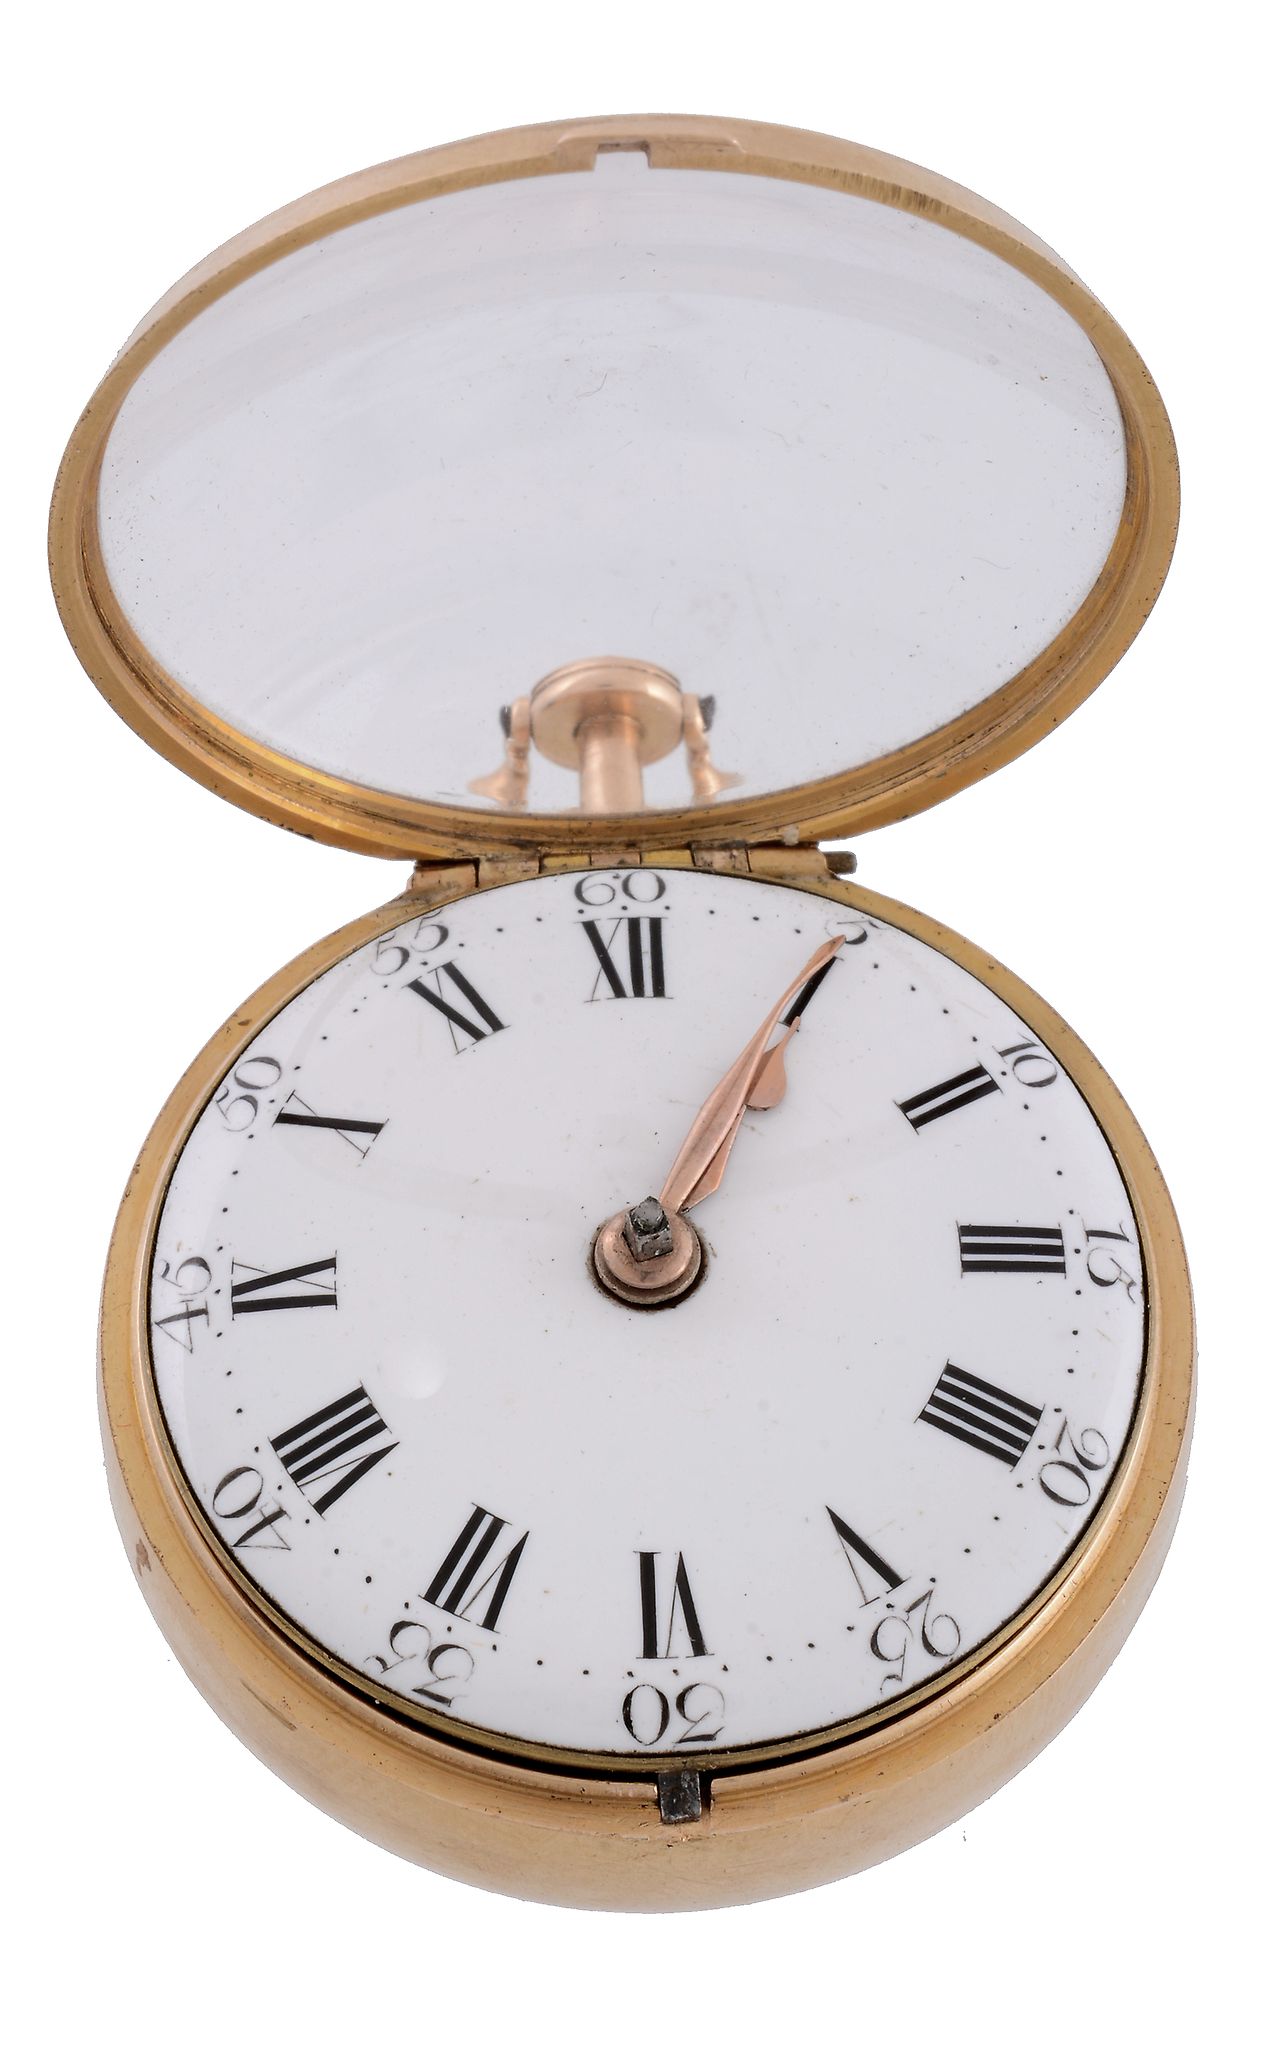 Wm. Turner, London, a 22 carat gold repousse pair cased pocket watch,   no. 9300, the inner case - Image 2 of 4